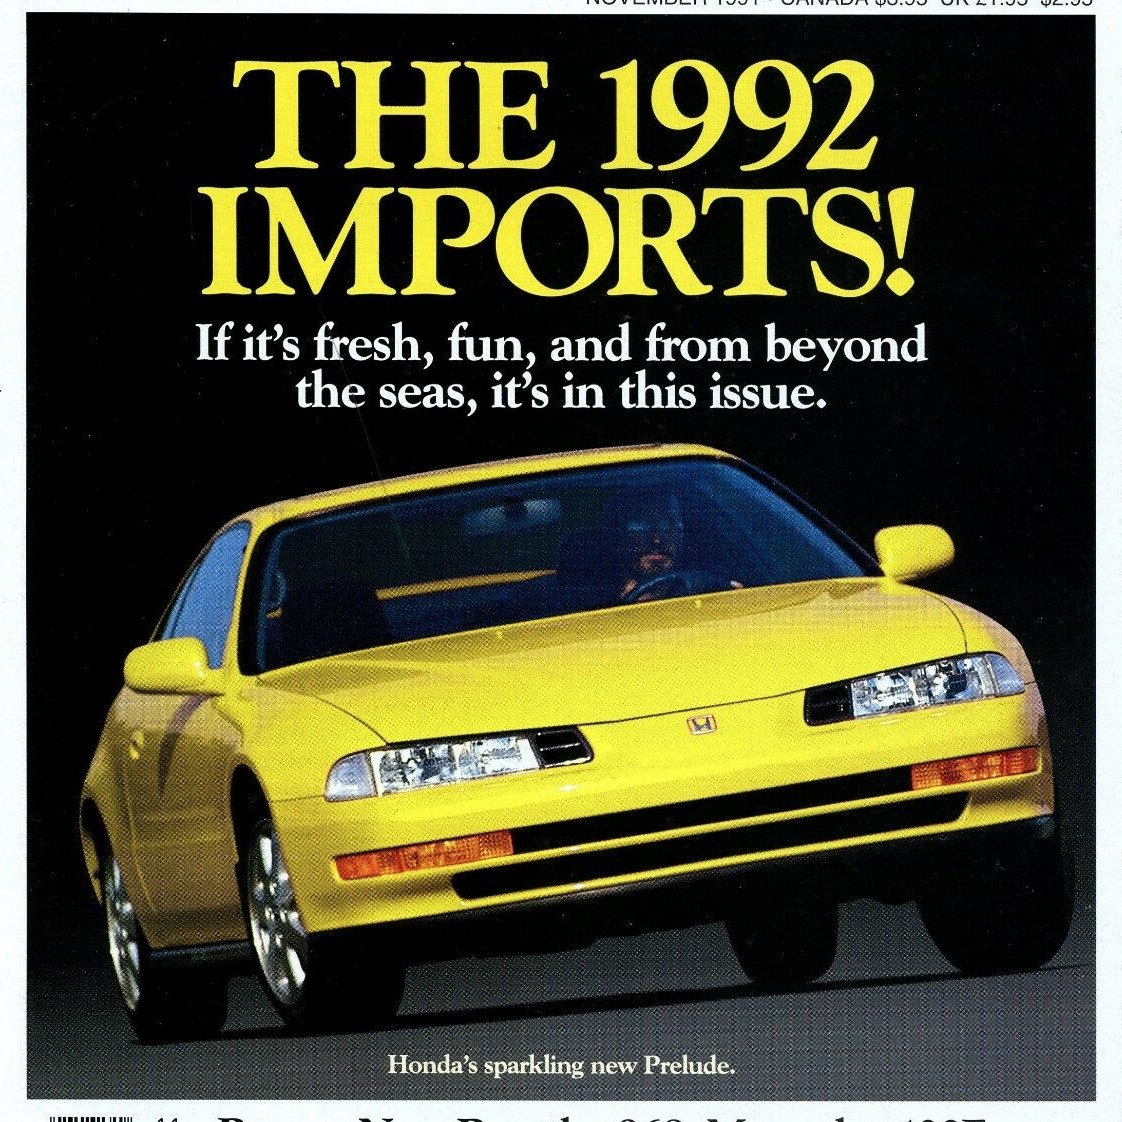 Regardless, the 2nd gen's "pervert lever" carried on through the 3rd and 4th JDM models. But although Honda still kept that "coveted" feature through 4th gen, they also wanted to finally break its Date Car reputation and make the Prelude a more competitive sports coupe worldwide.